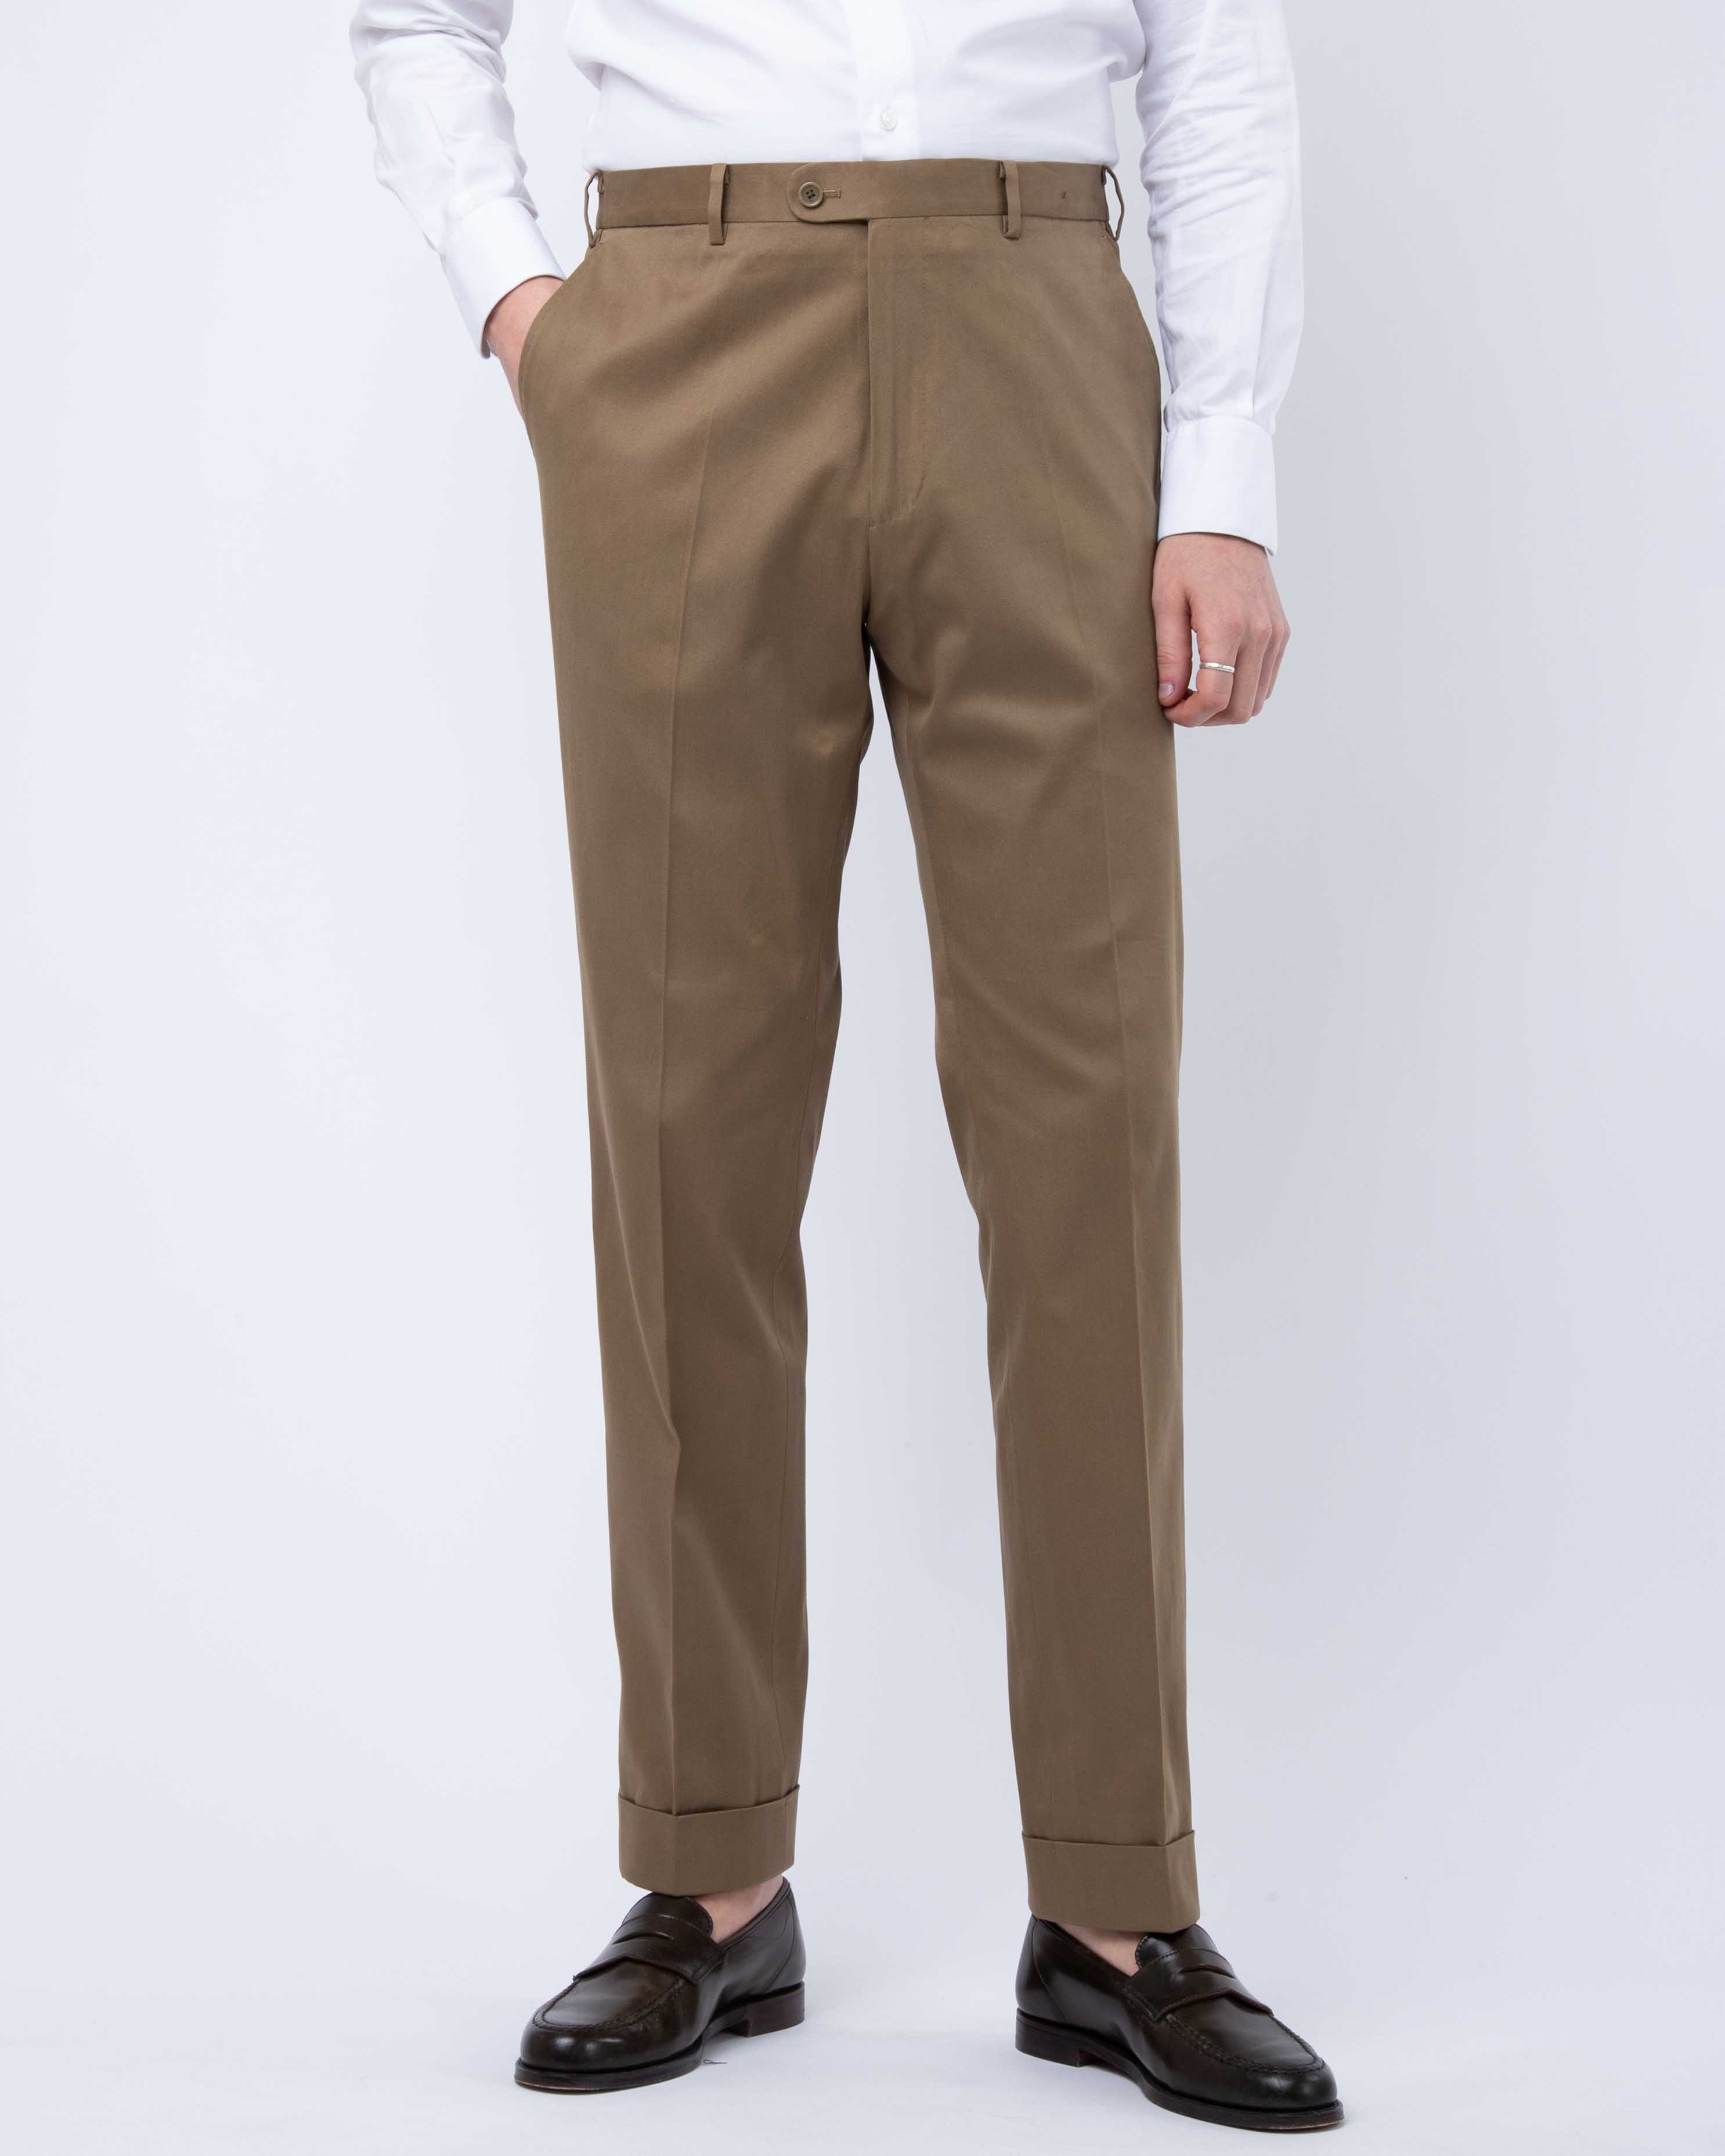 Buy U.S. Polo Assn. Mid Rise Flat Front Trousers - NNNOW.com-atpcosmetics.com.vn